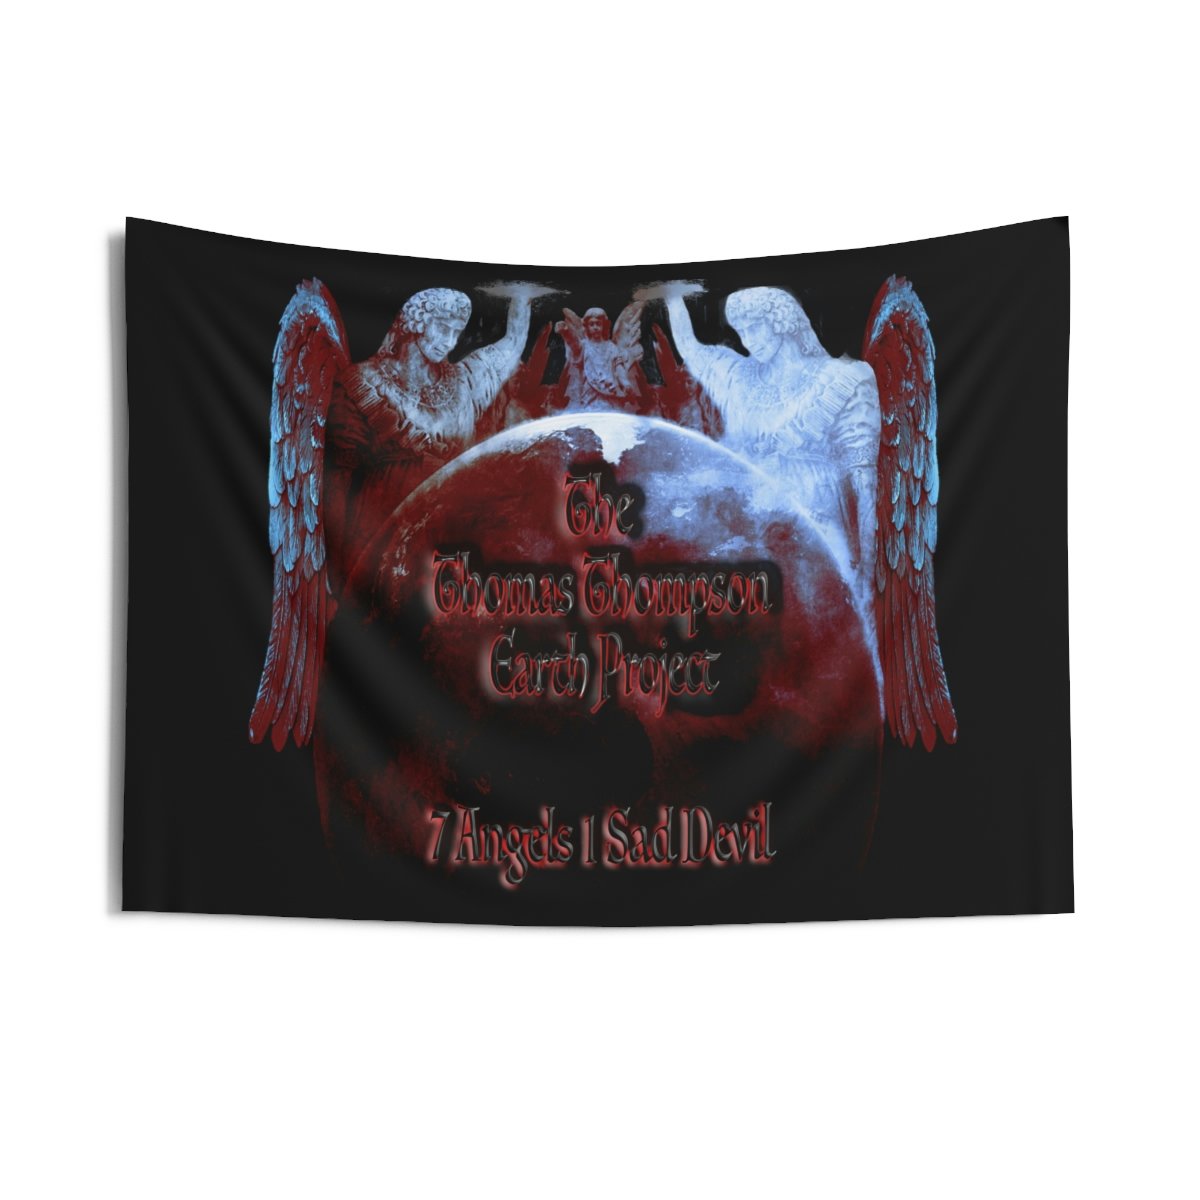 The Thomas Thompson Earth Project 7 Angels Indoor Wall Tapestries